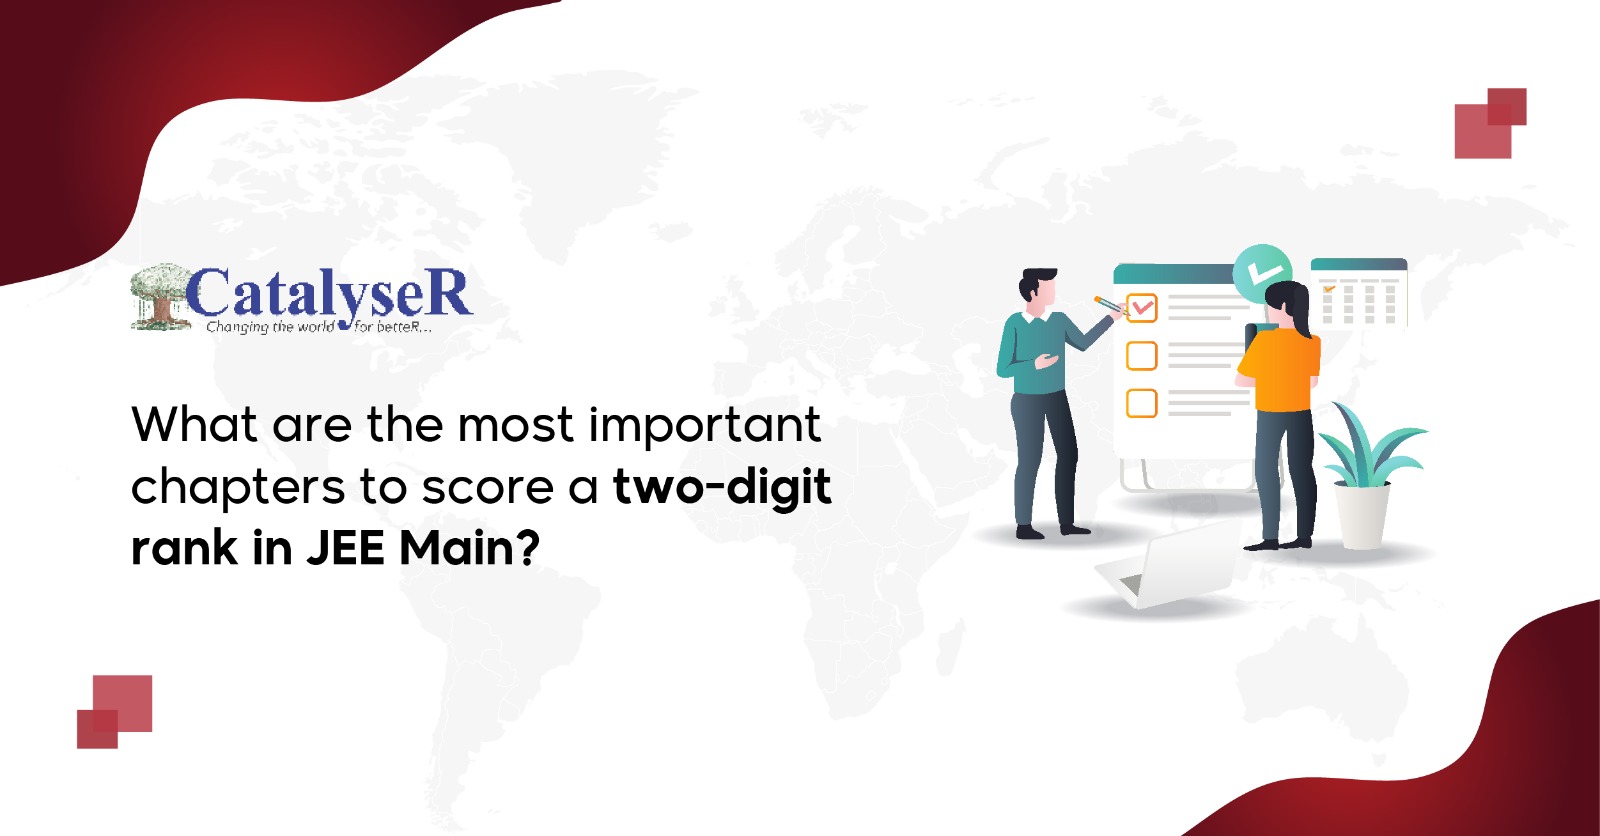 What are the most important chapters to score a two-digit rank in JEE Main?